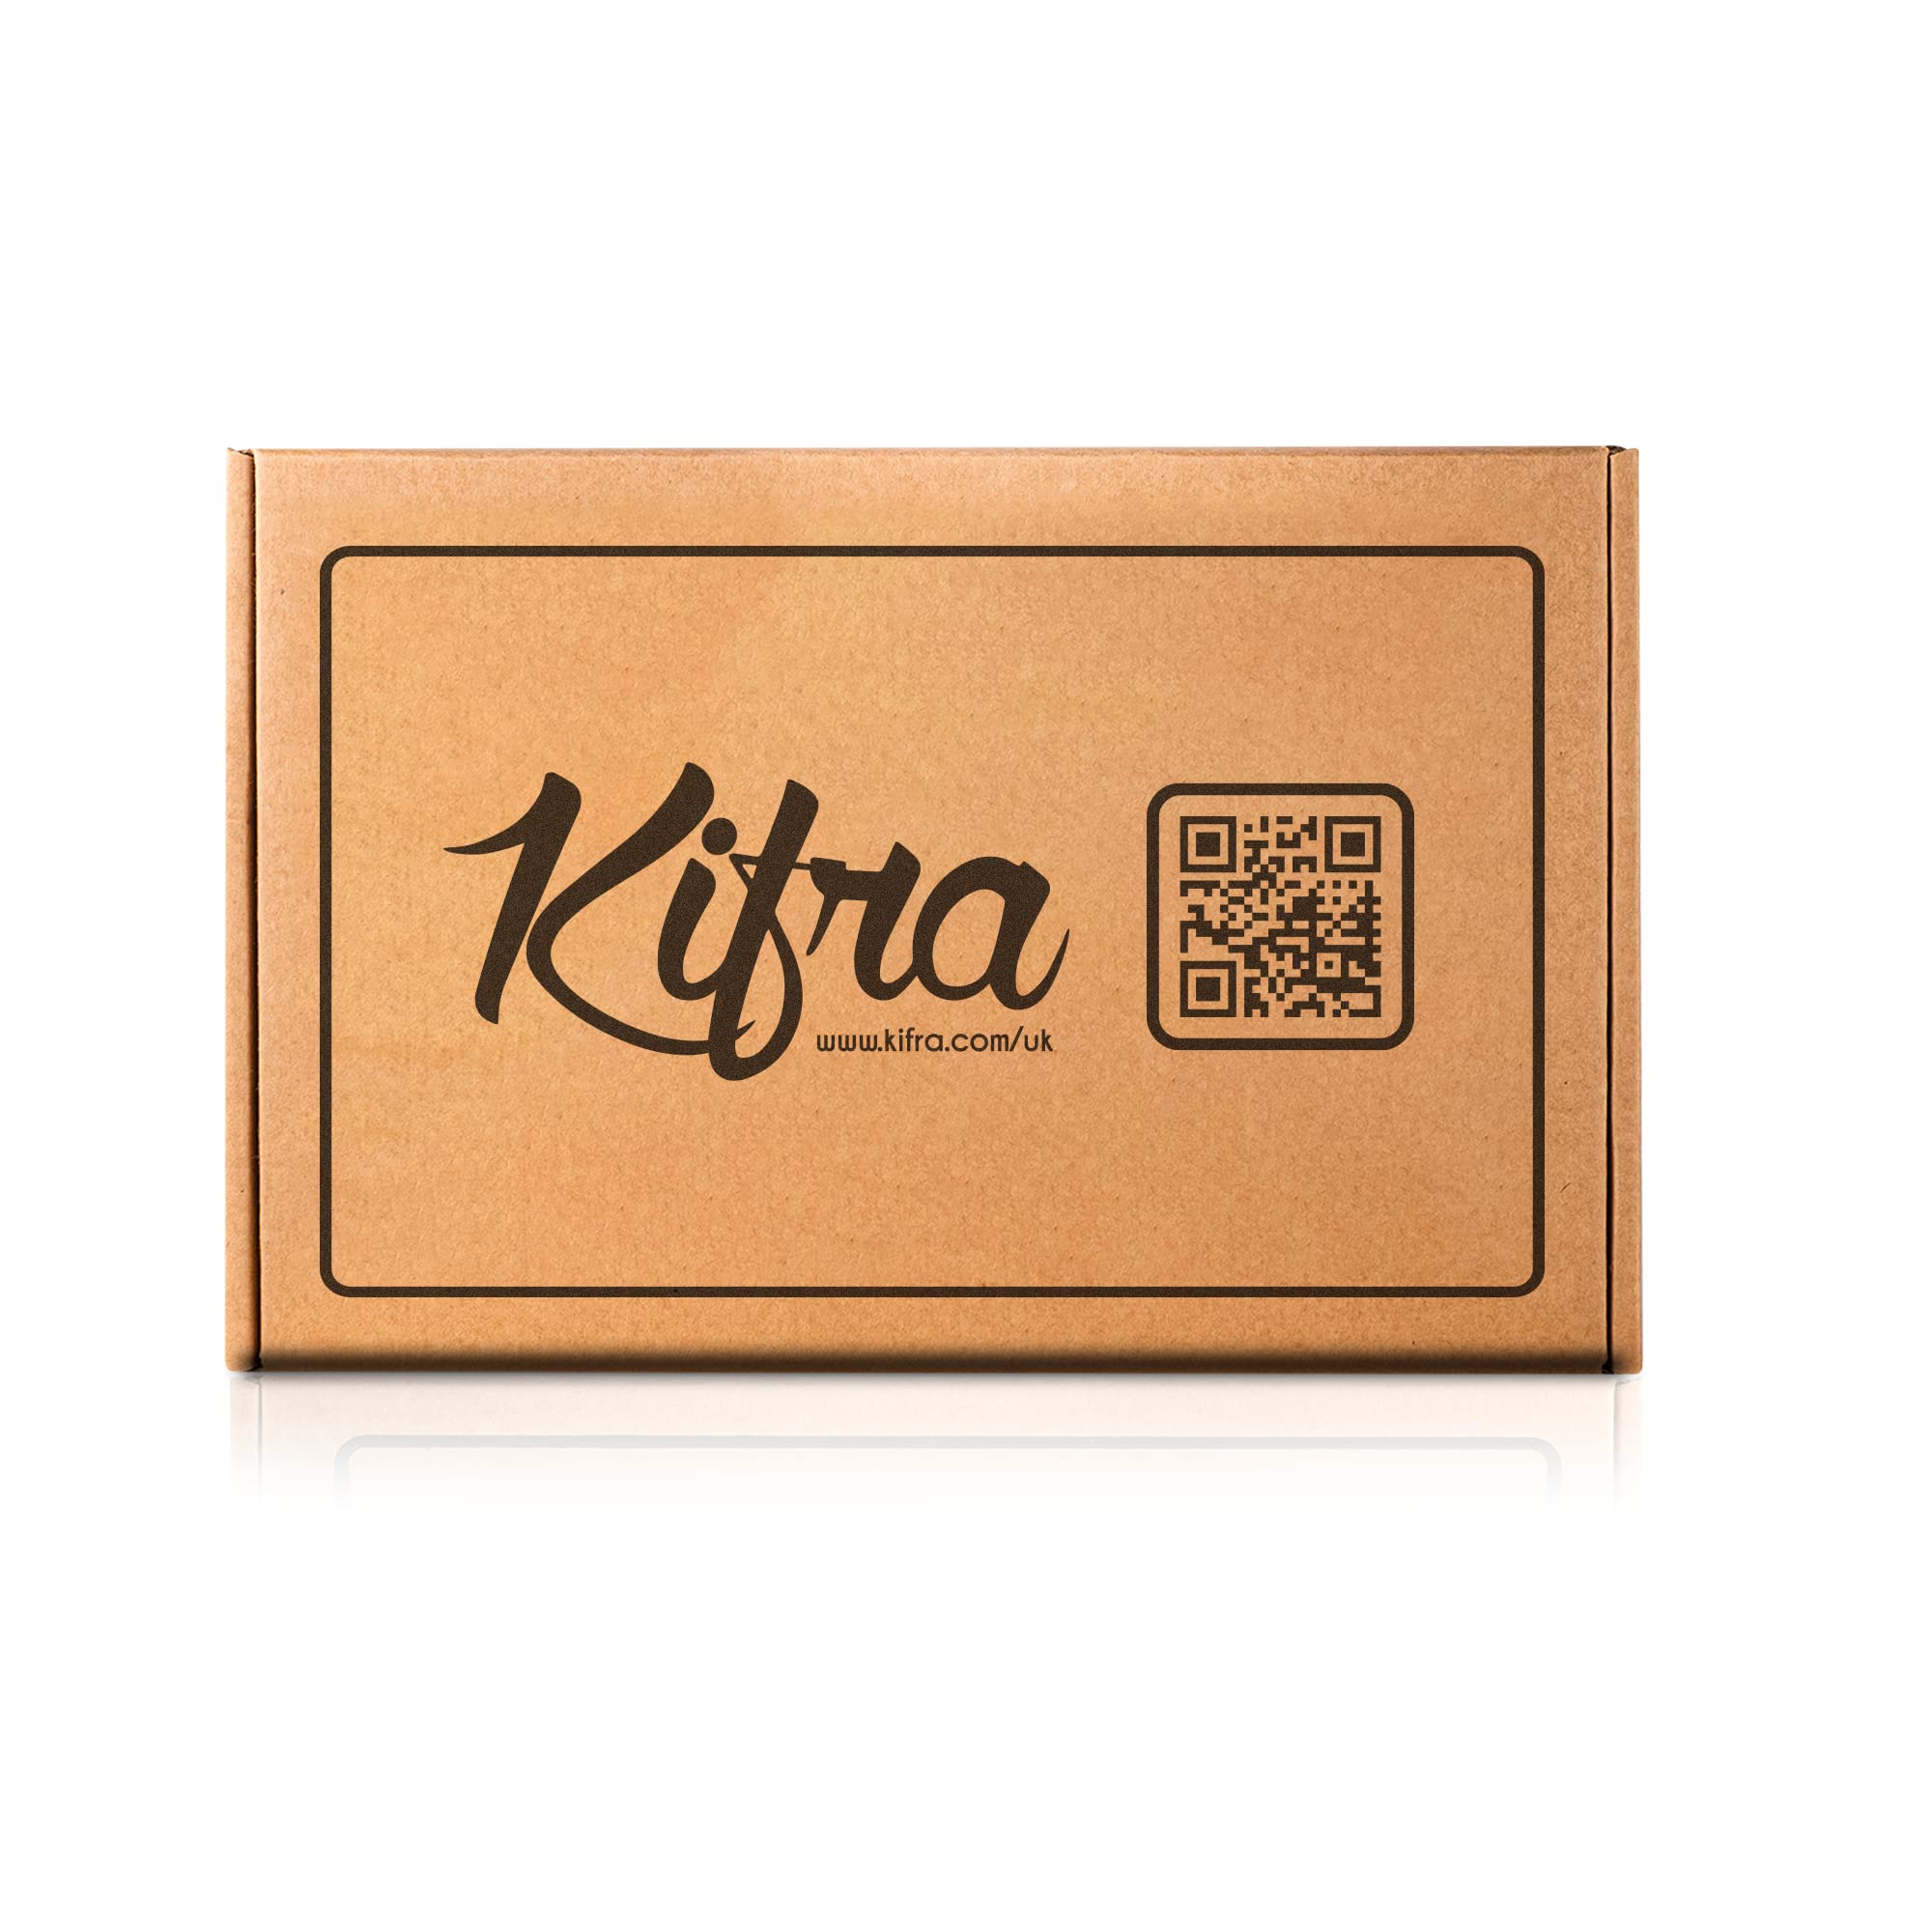 KIFRA Concentrated Laundry Fragrance Box of 5 Minidoses Ocean